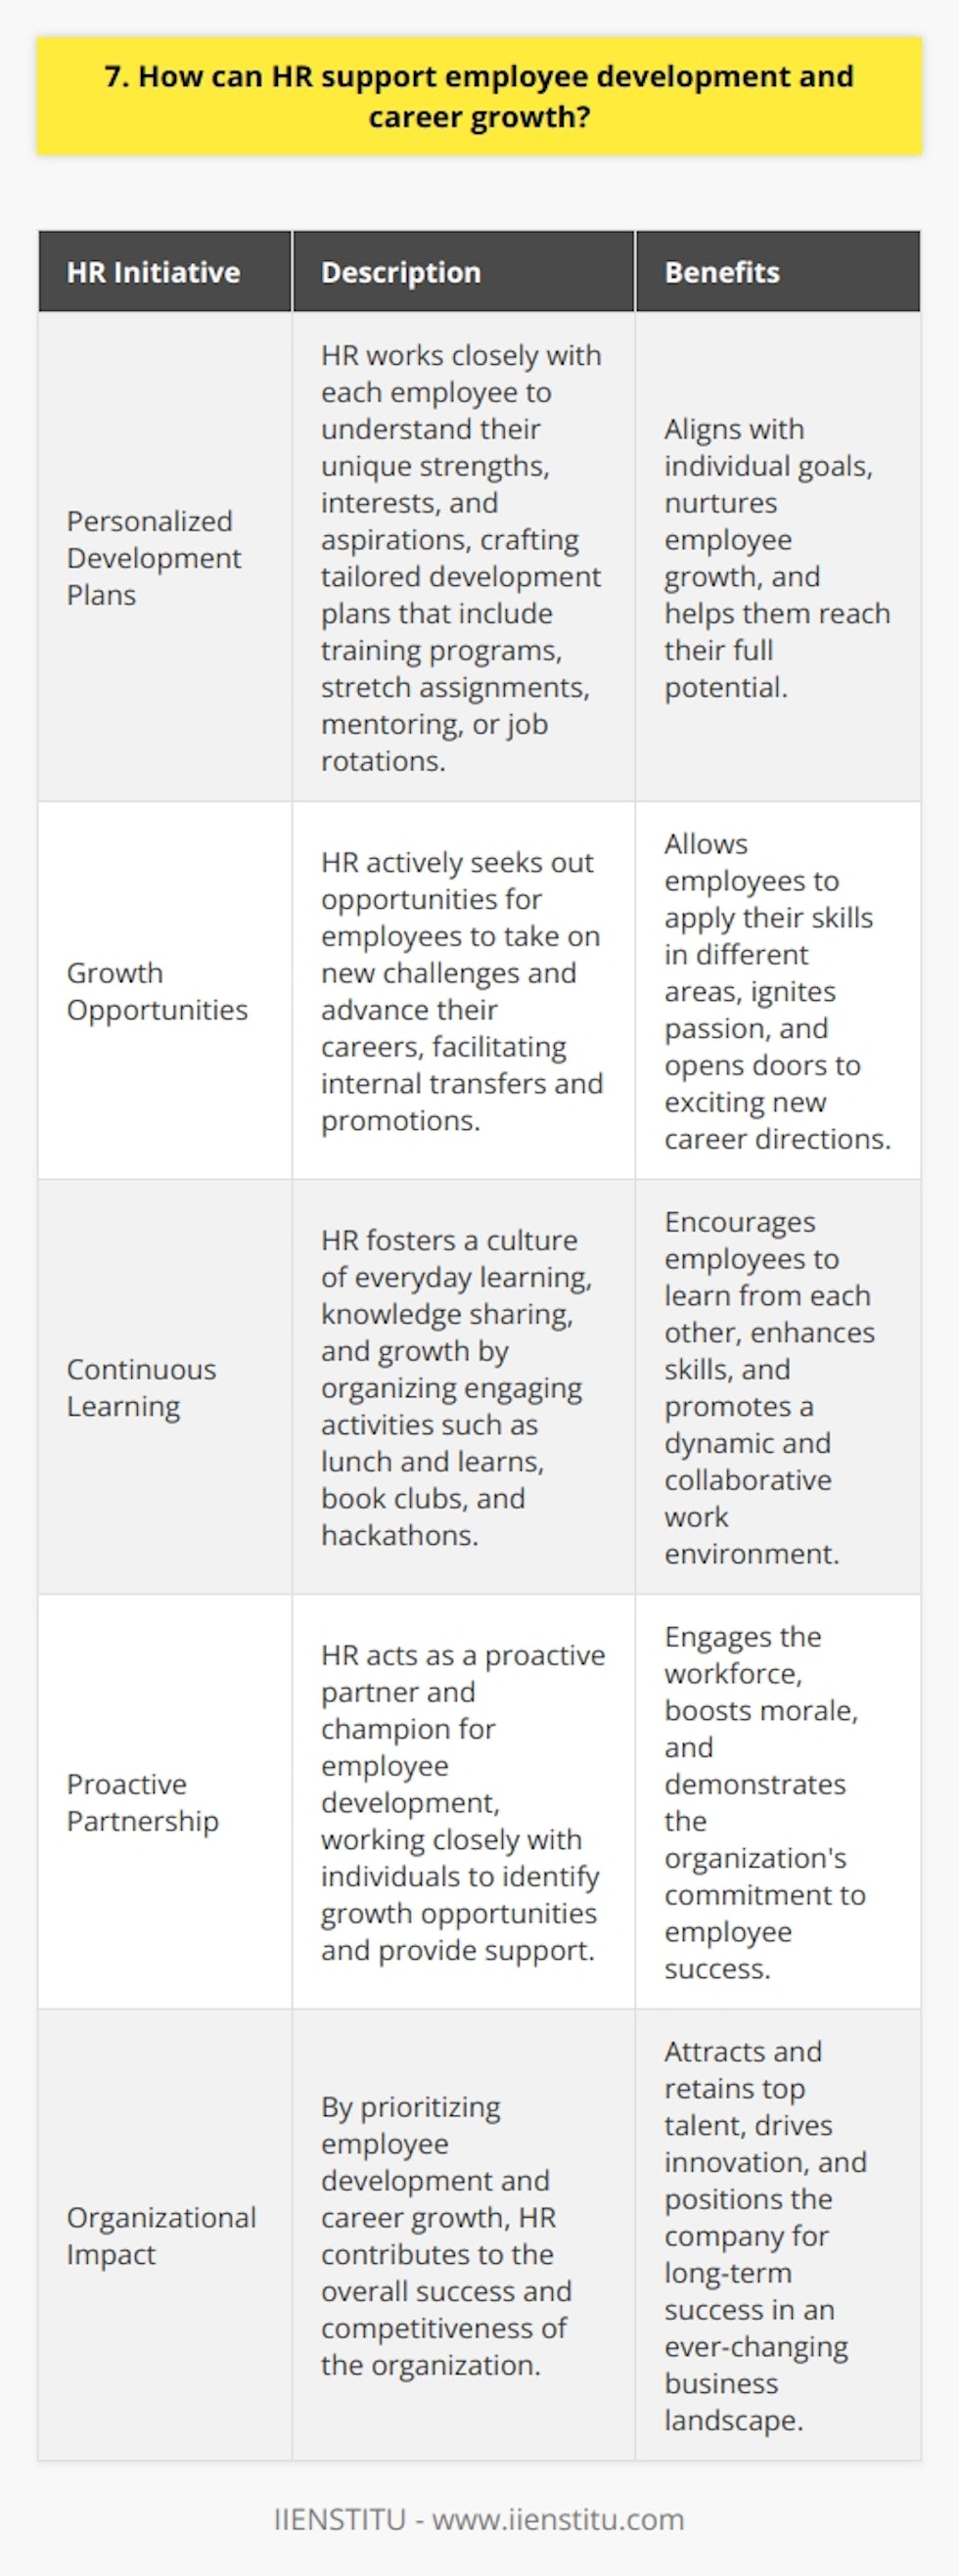 I believe HR plays a crucial role in nurturing employee growth and helping them reach their full potential. In my previous job, I witnessed firsthand how a dedicated HR team can make a real difference. <h3>Personalized Development Plans</h3><p>By working closely with each employee to understand their unique strengths, interests and aspirations, HR can craft tailored development plans. These might include training programs, stretch assignments, mentoring or job rotations that align with the individuals goals. Growth Opportunities HR should always be on the lookout for opportunities for employees to take on new challenges and advance their careers. They can facilitate internal transfers and promotions, letting people apply their skills in different areas. I remember how supported I felt when an HR business partner encouraged me to take on a project outside my normal scope. It ended up igniting a passion and opening doors to an exciting new career direction I hadnt previously considered! Continuous Learning Beyond formal programs, HR should foster a culture of everyday learning, knowledge sharing and growth. They can organize lunch and learns, book clubs, hackathons - fun opportunities for us to learn from each other. By being proactive partners and champions for employee development, I believe HR has immense potential to engage the workforce and help every individual reach their goals, which ultimately drives the success of the entire organization. And thats something I would be truly excited to be part of.